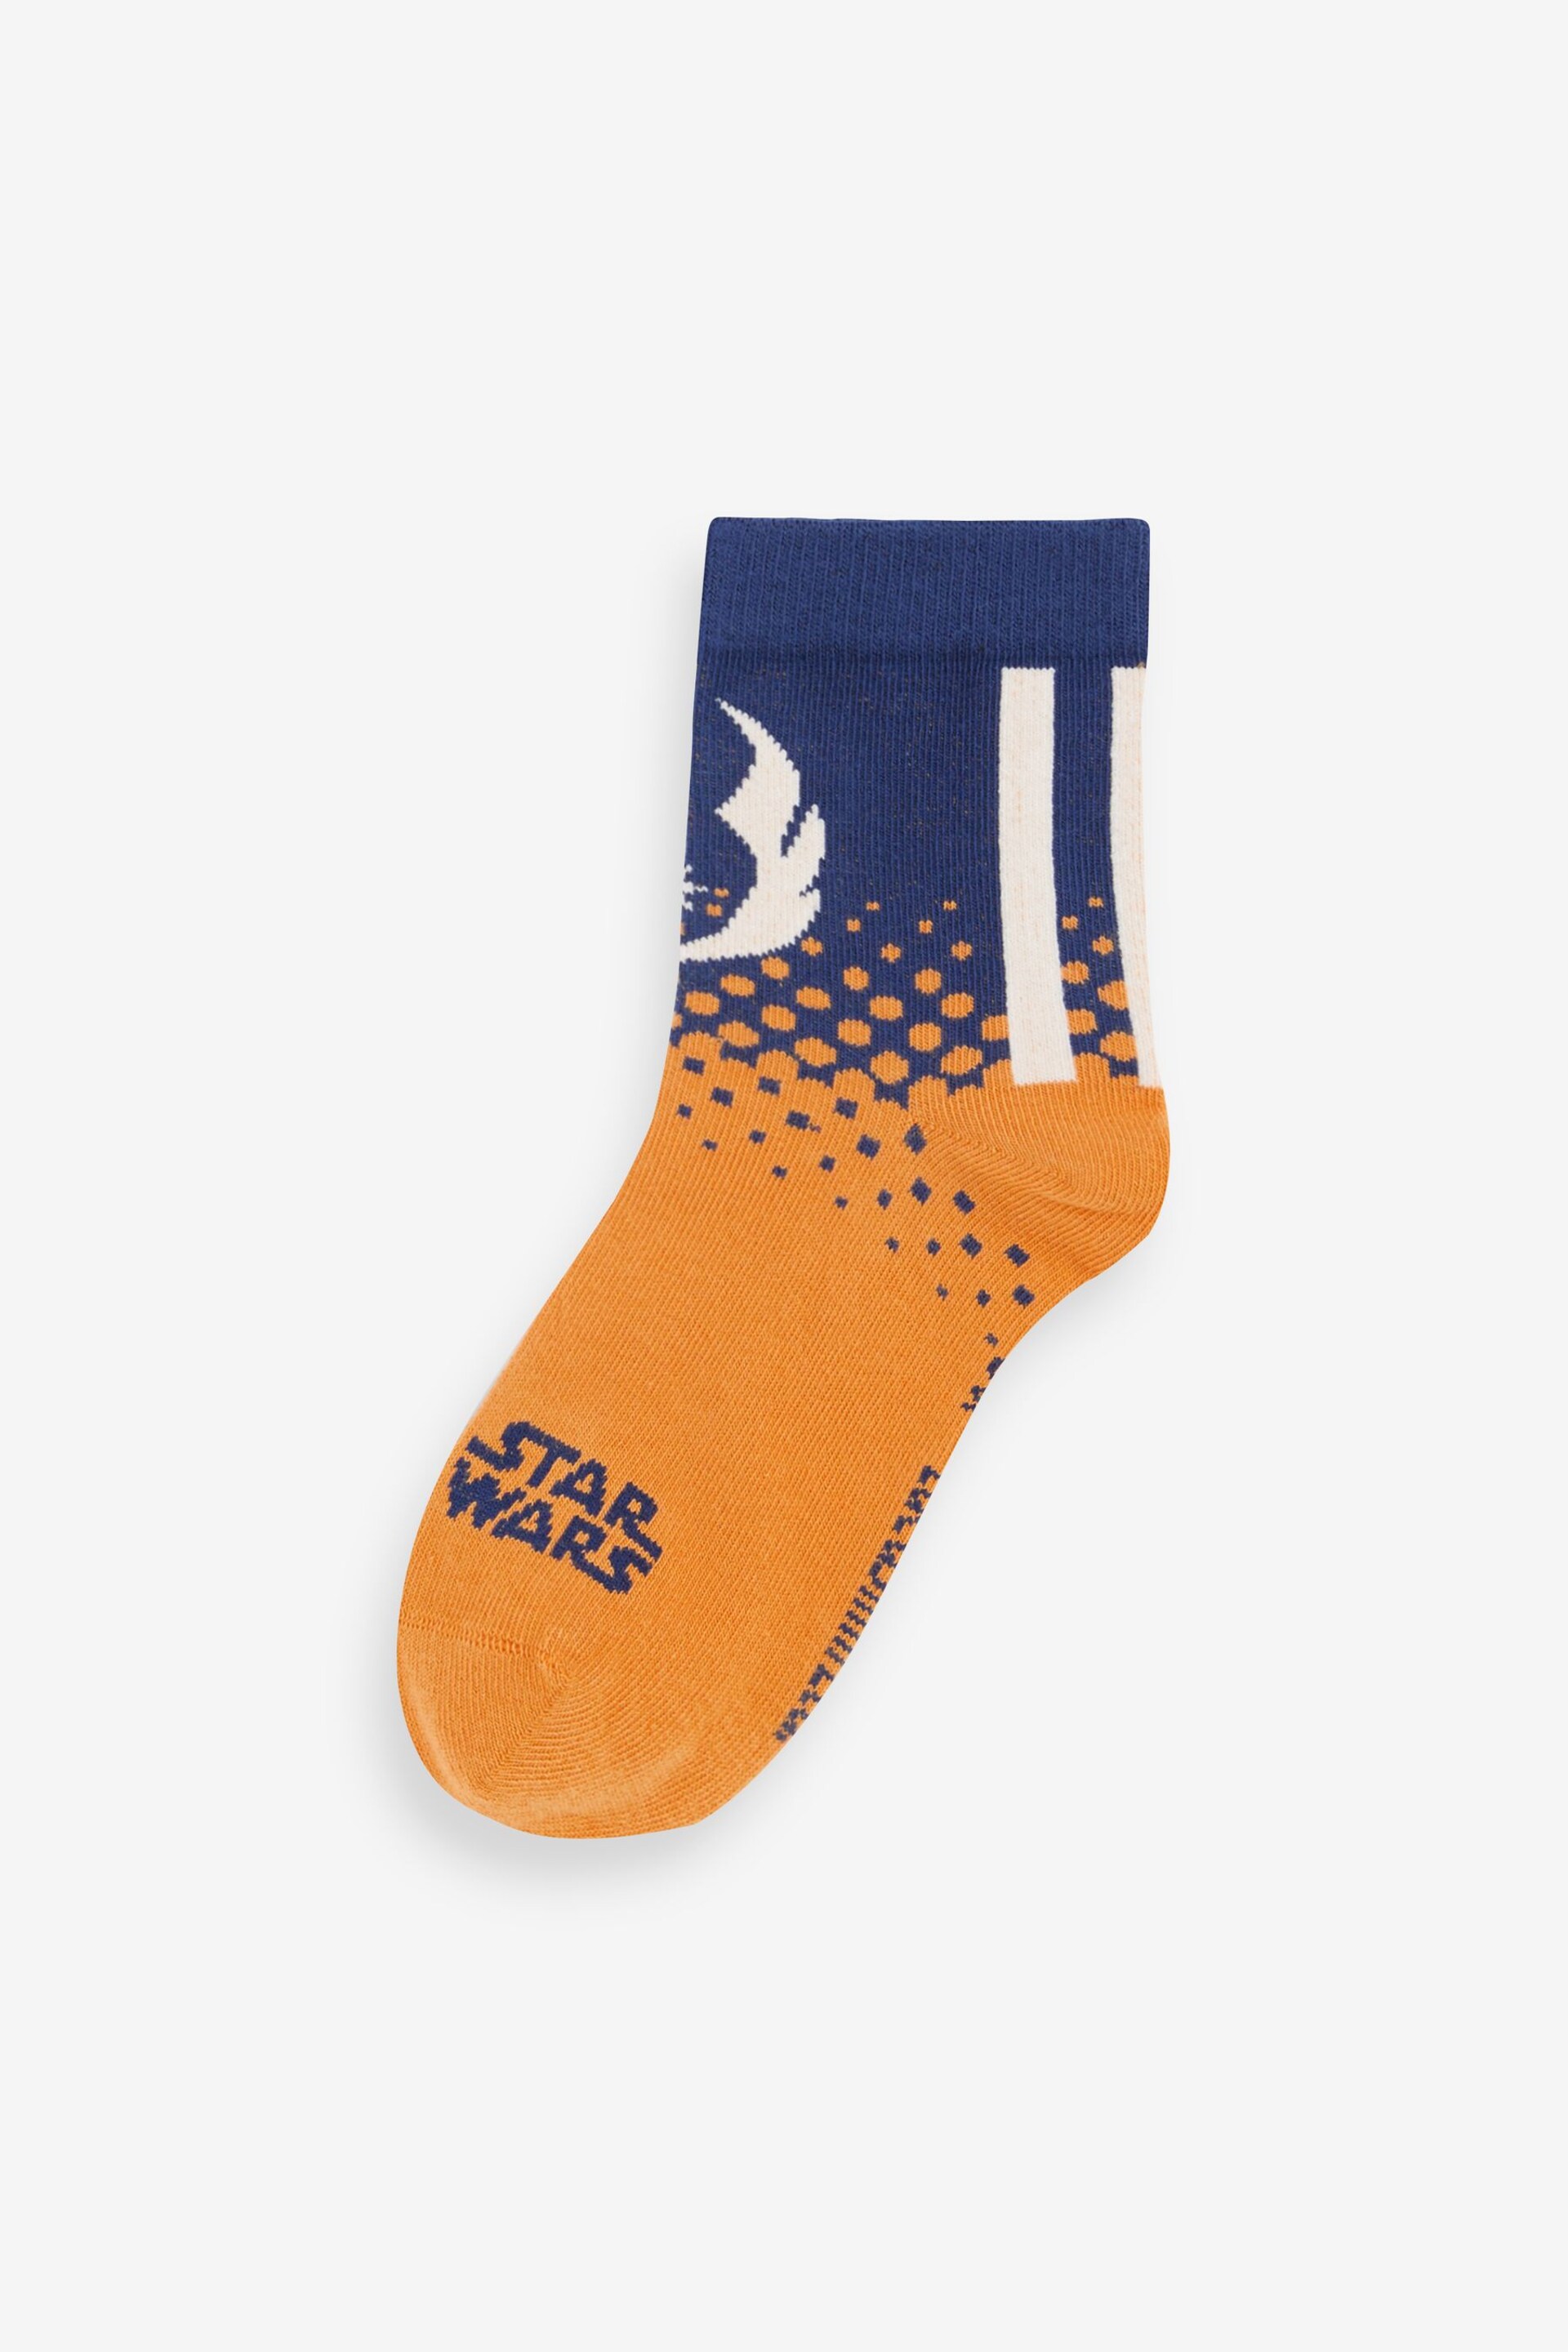 adidas Blue Star Wars Young Jedi Socks 3 Pack - Image 5 of 7